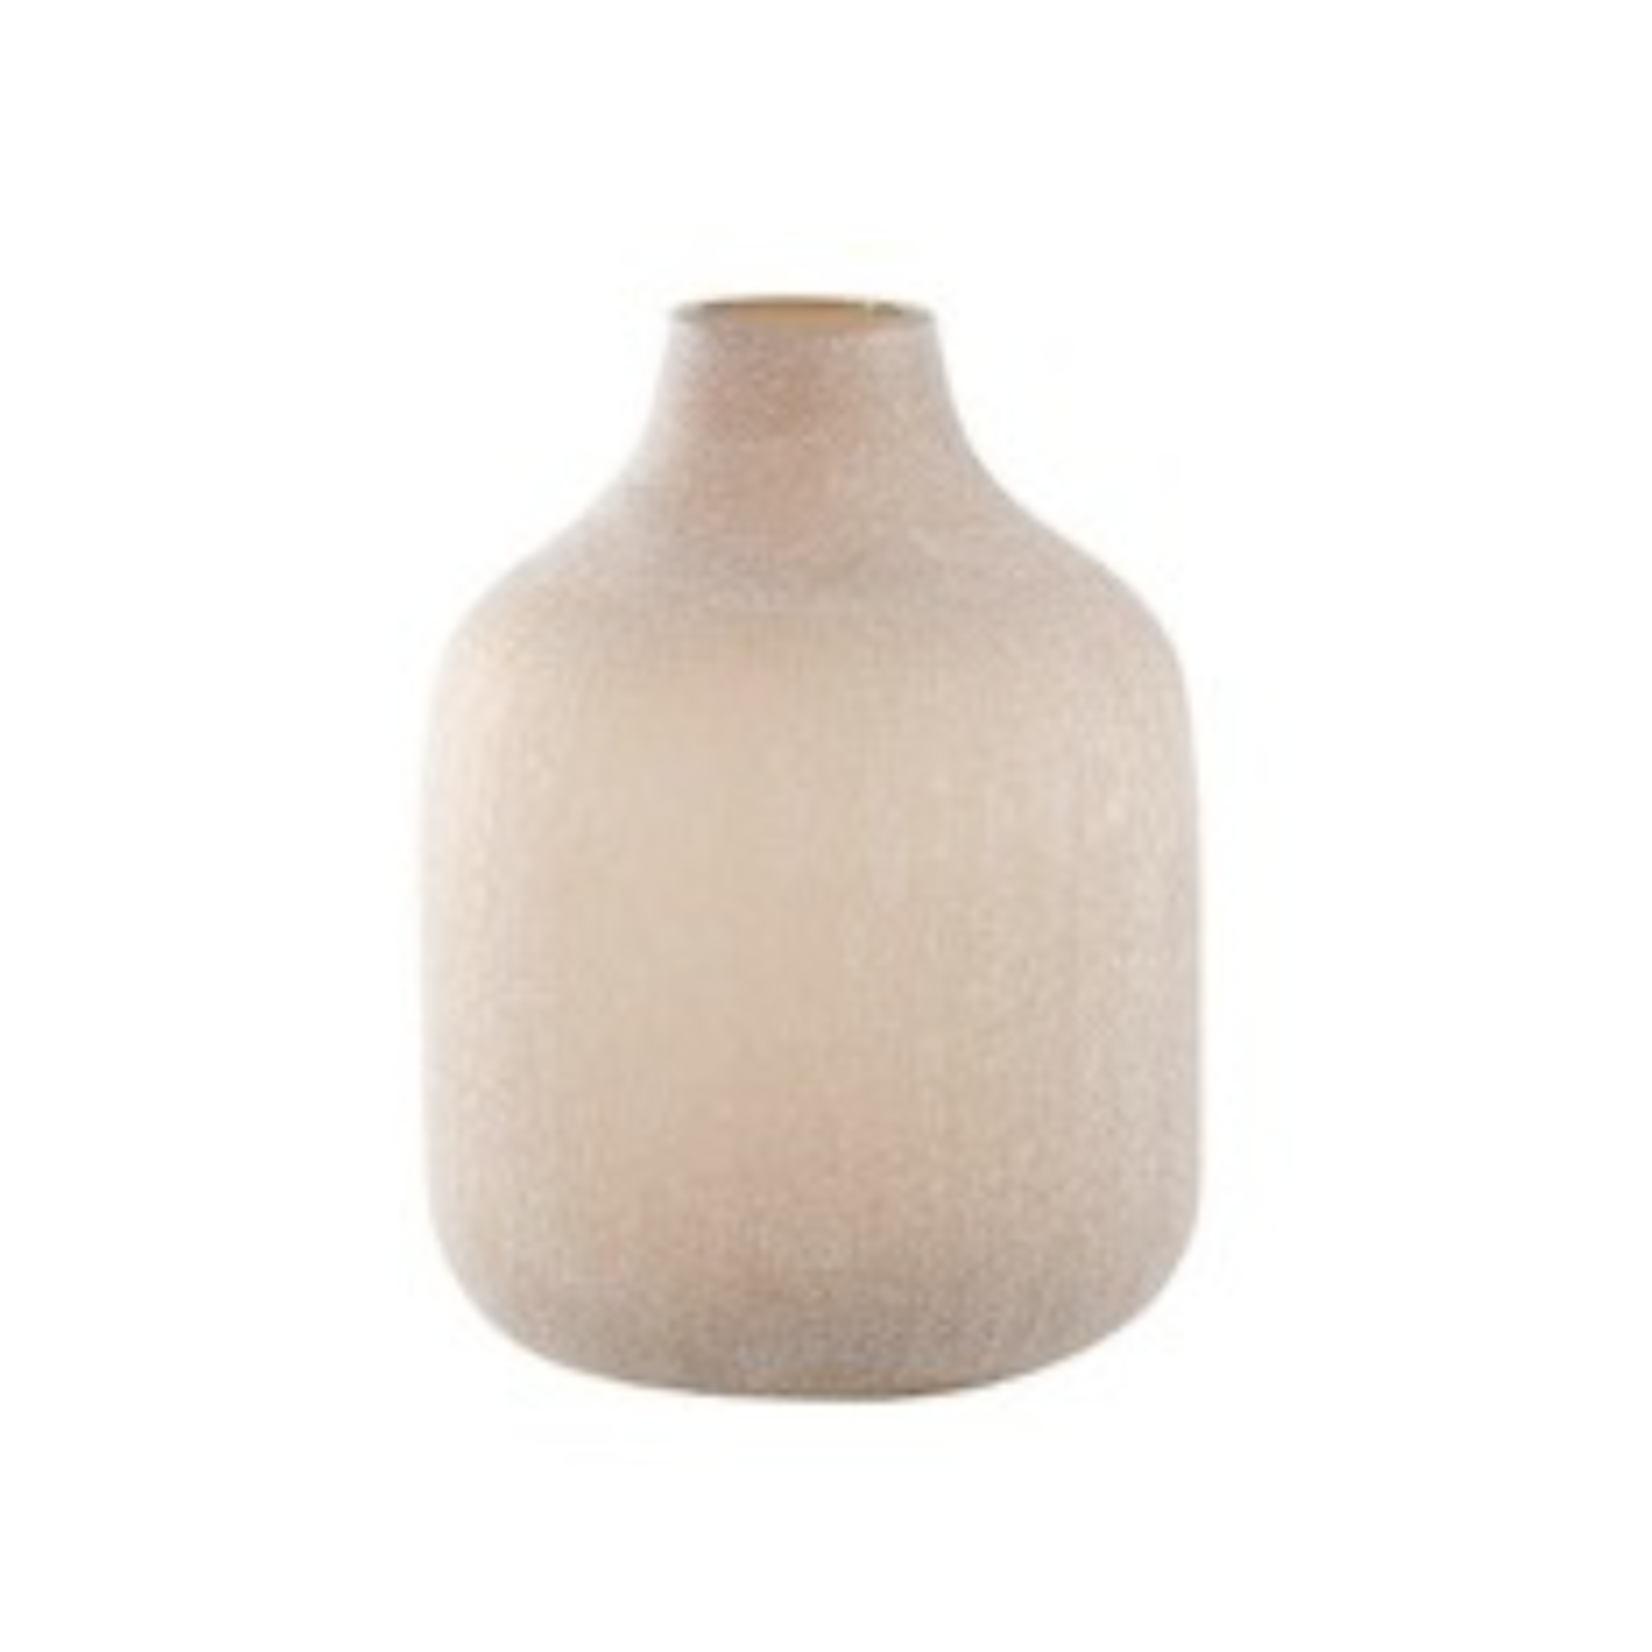 50% OFF WAS $45 NOW $22.50. 9.5”H X 6.5” AMBER/IVORY BUD VASE